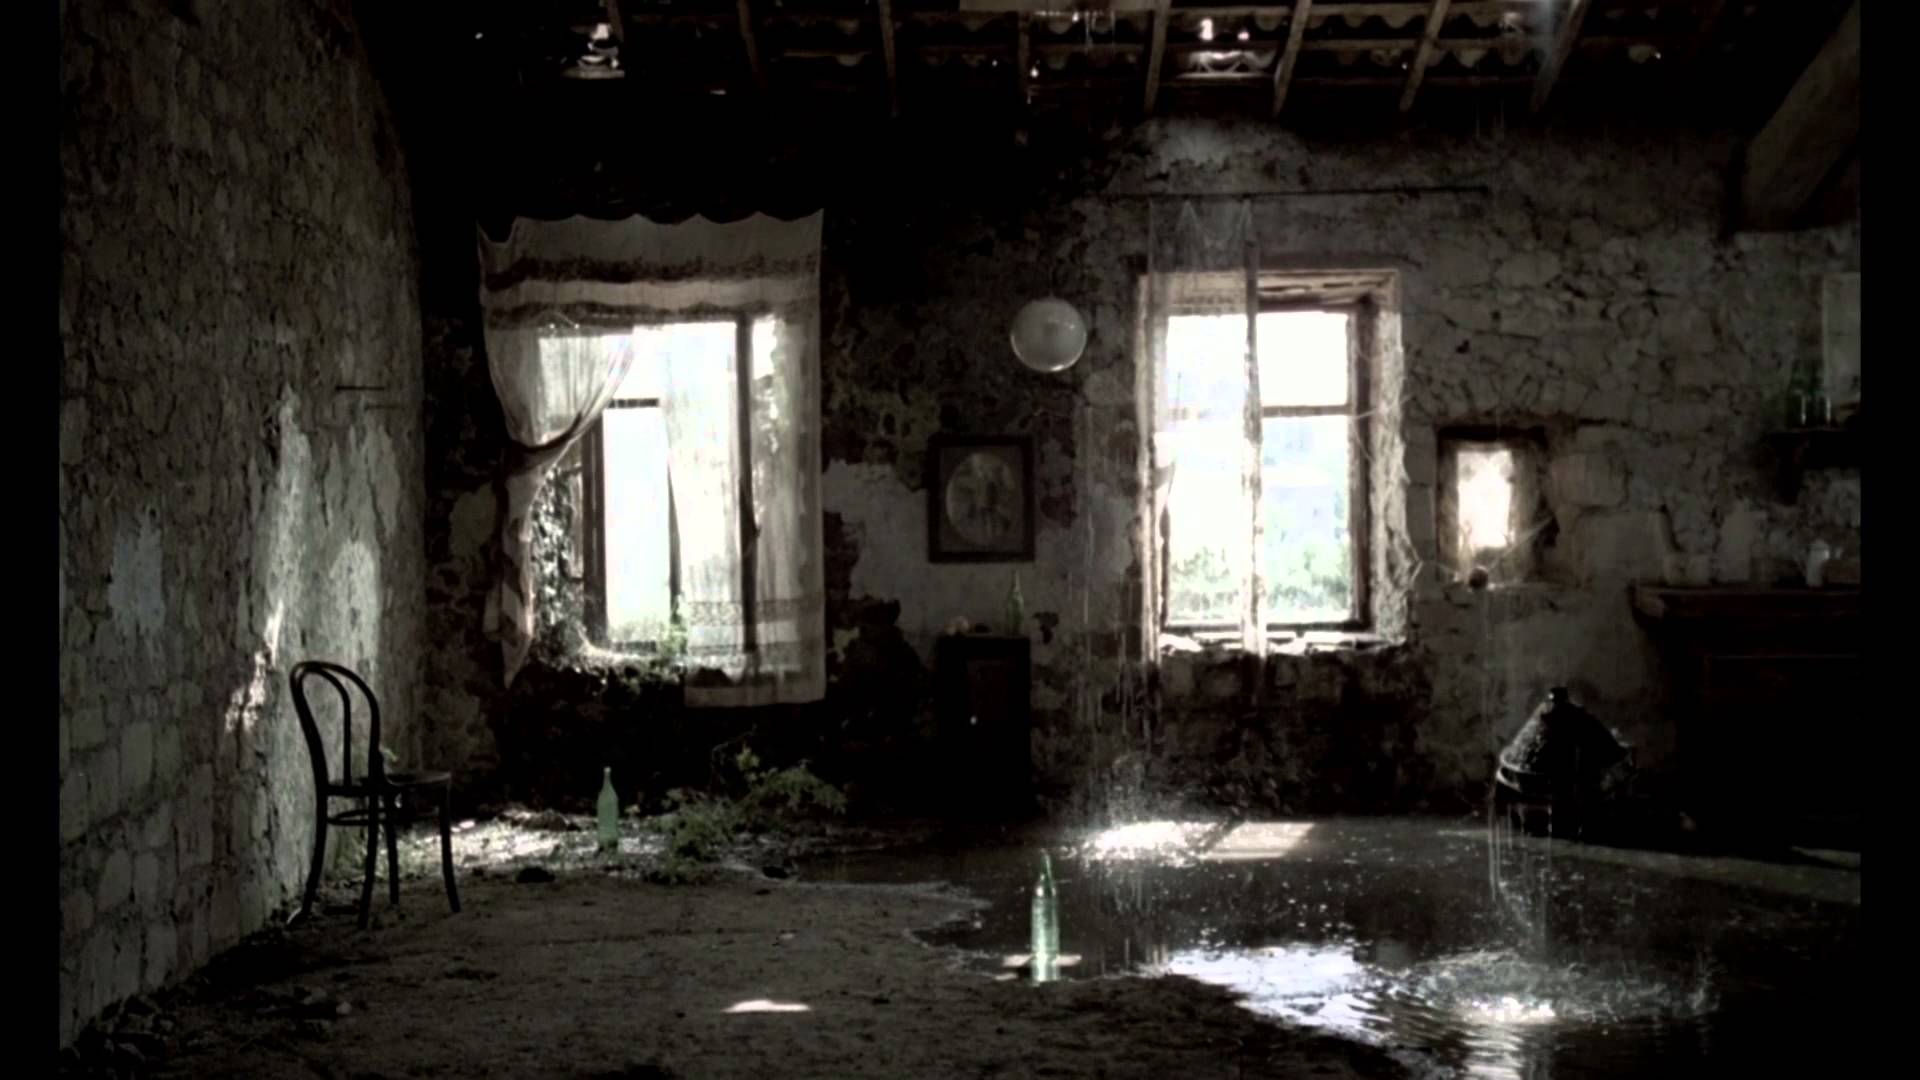 5 Film Techniques You Can Learn from Andrei Tarkovsky Right Now - Nostalghia